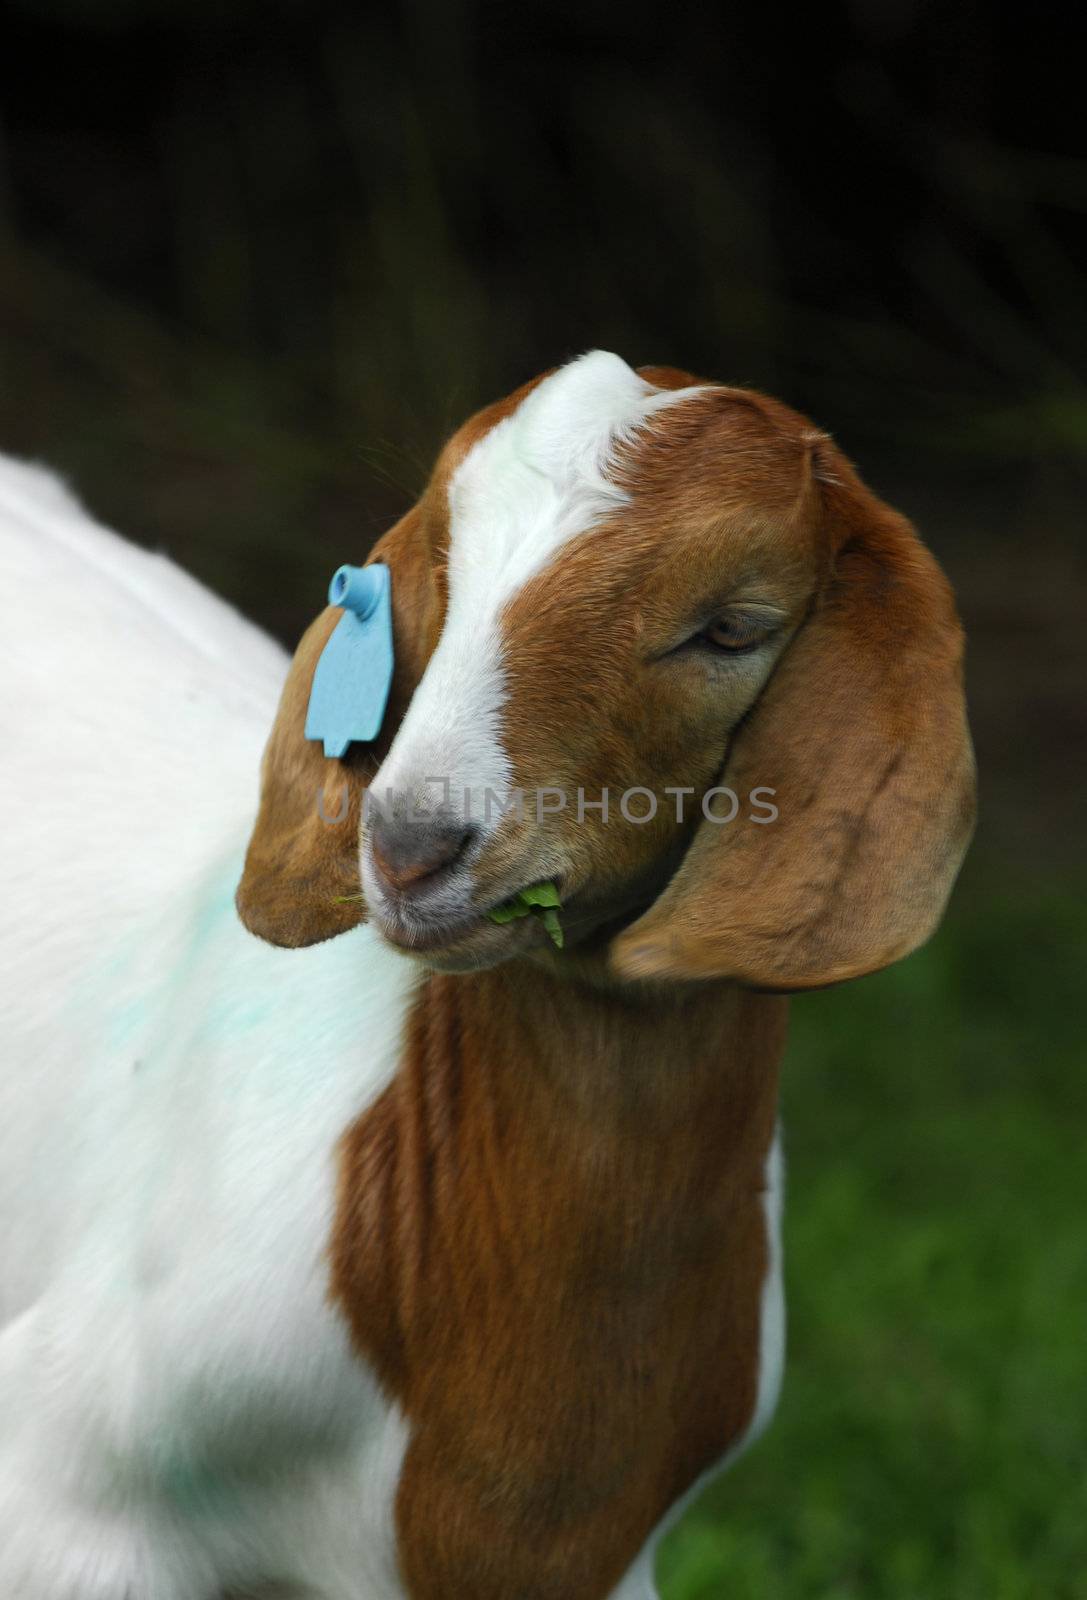 goat grazing by willeecole123